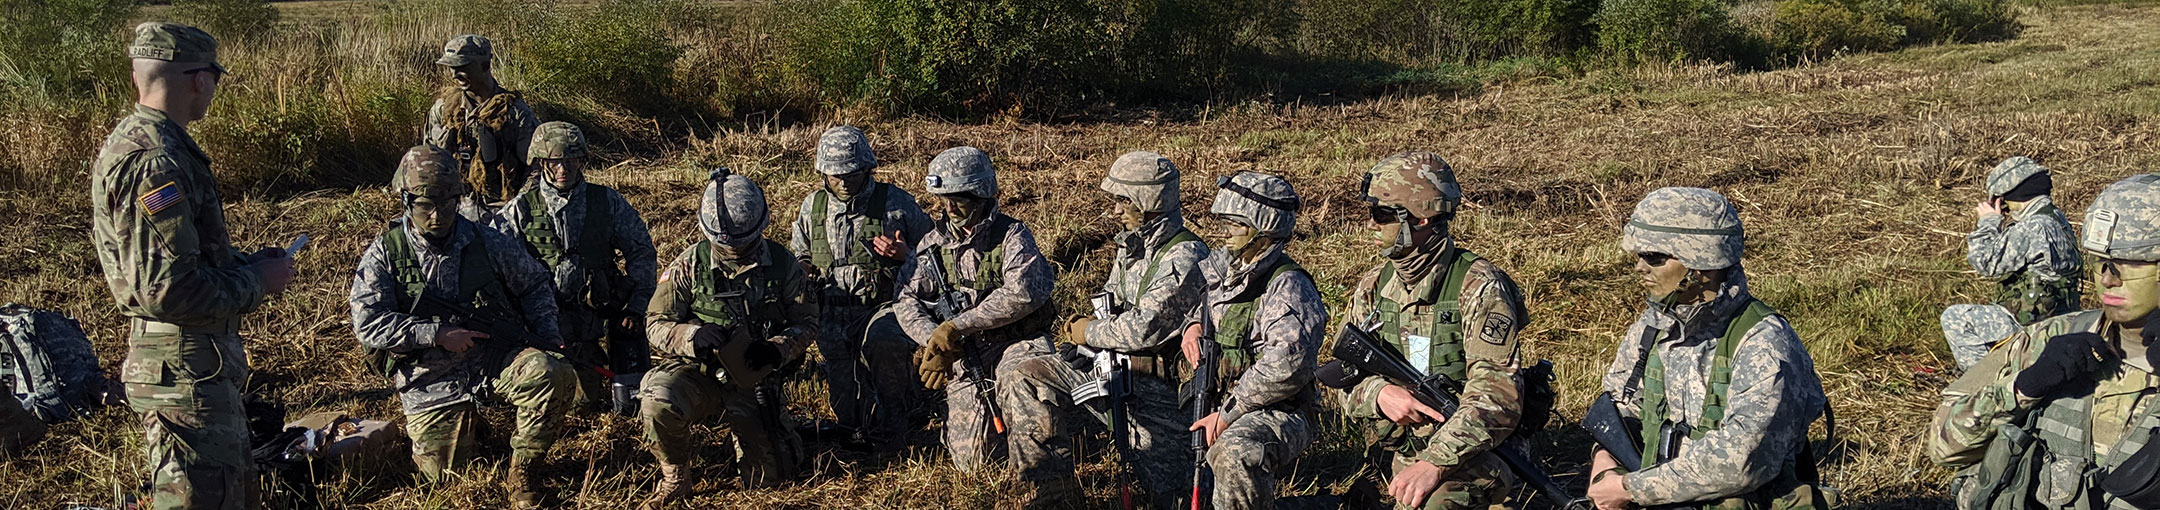 Army ROTC students in field with training rifles.